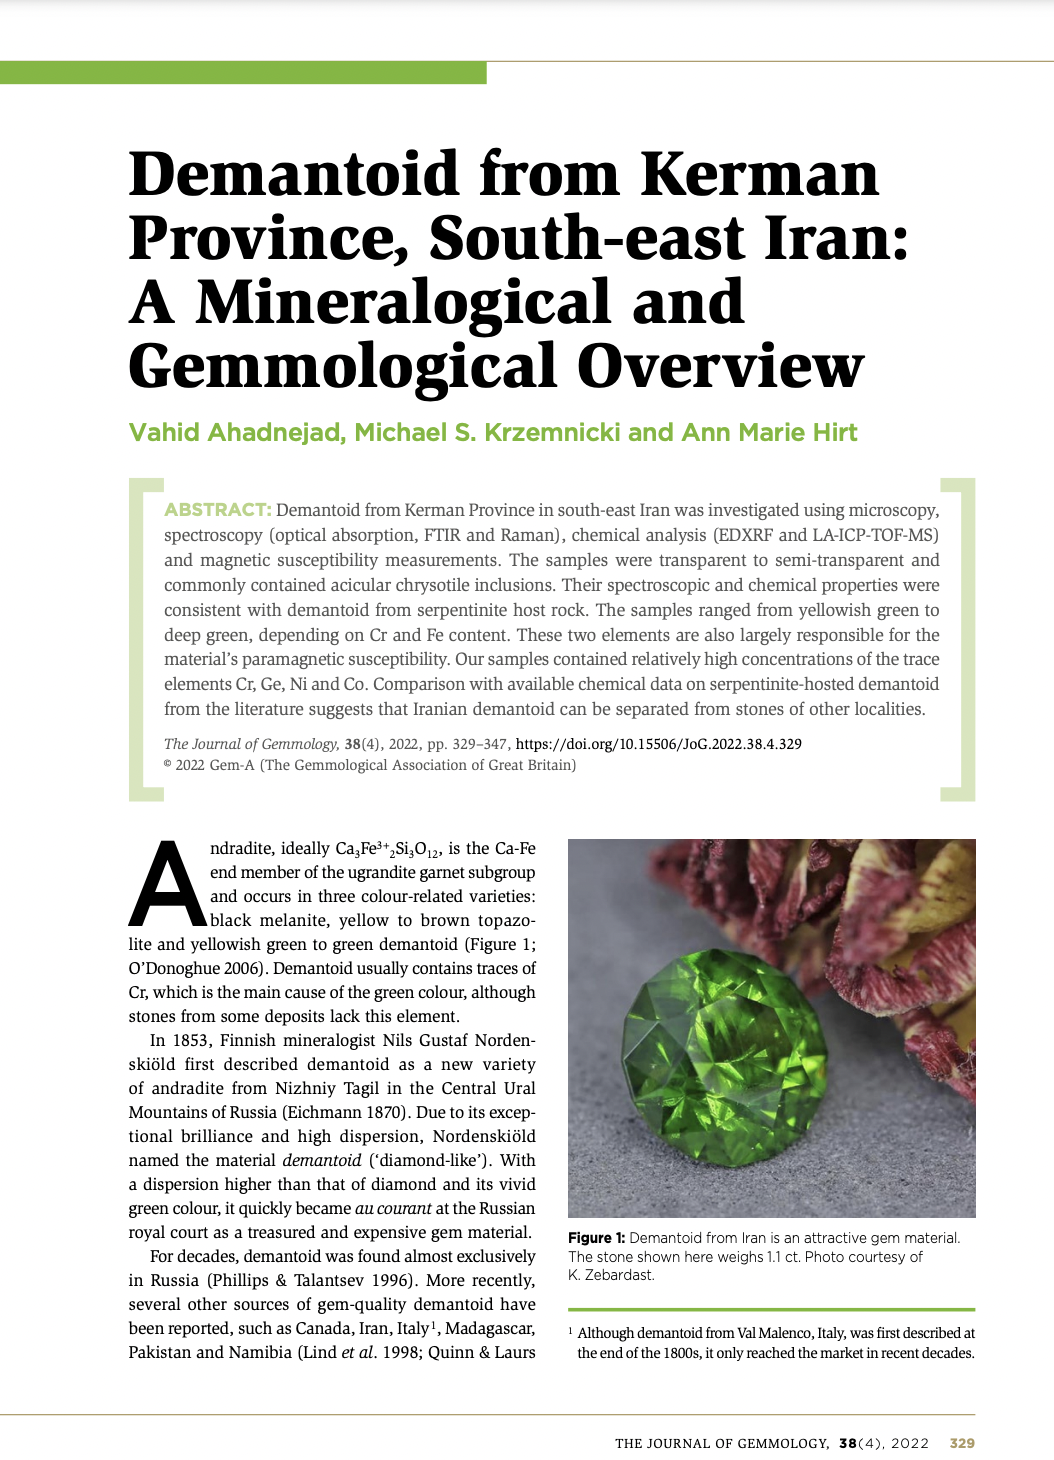 Demantoid from Kerman Province, South-east Iran: A Mineralogical and Gemmological Overview